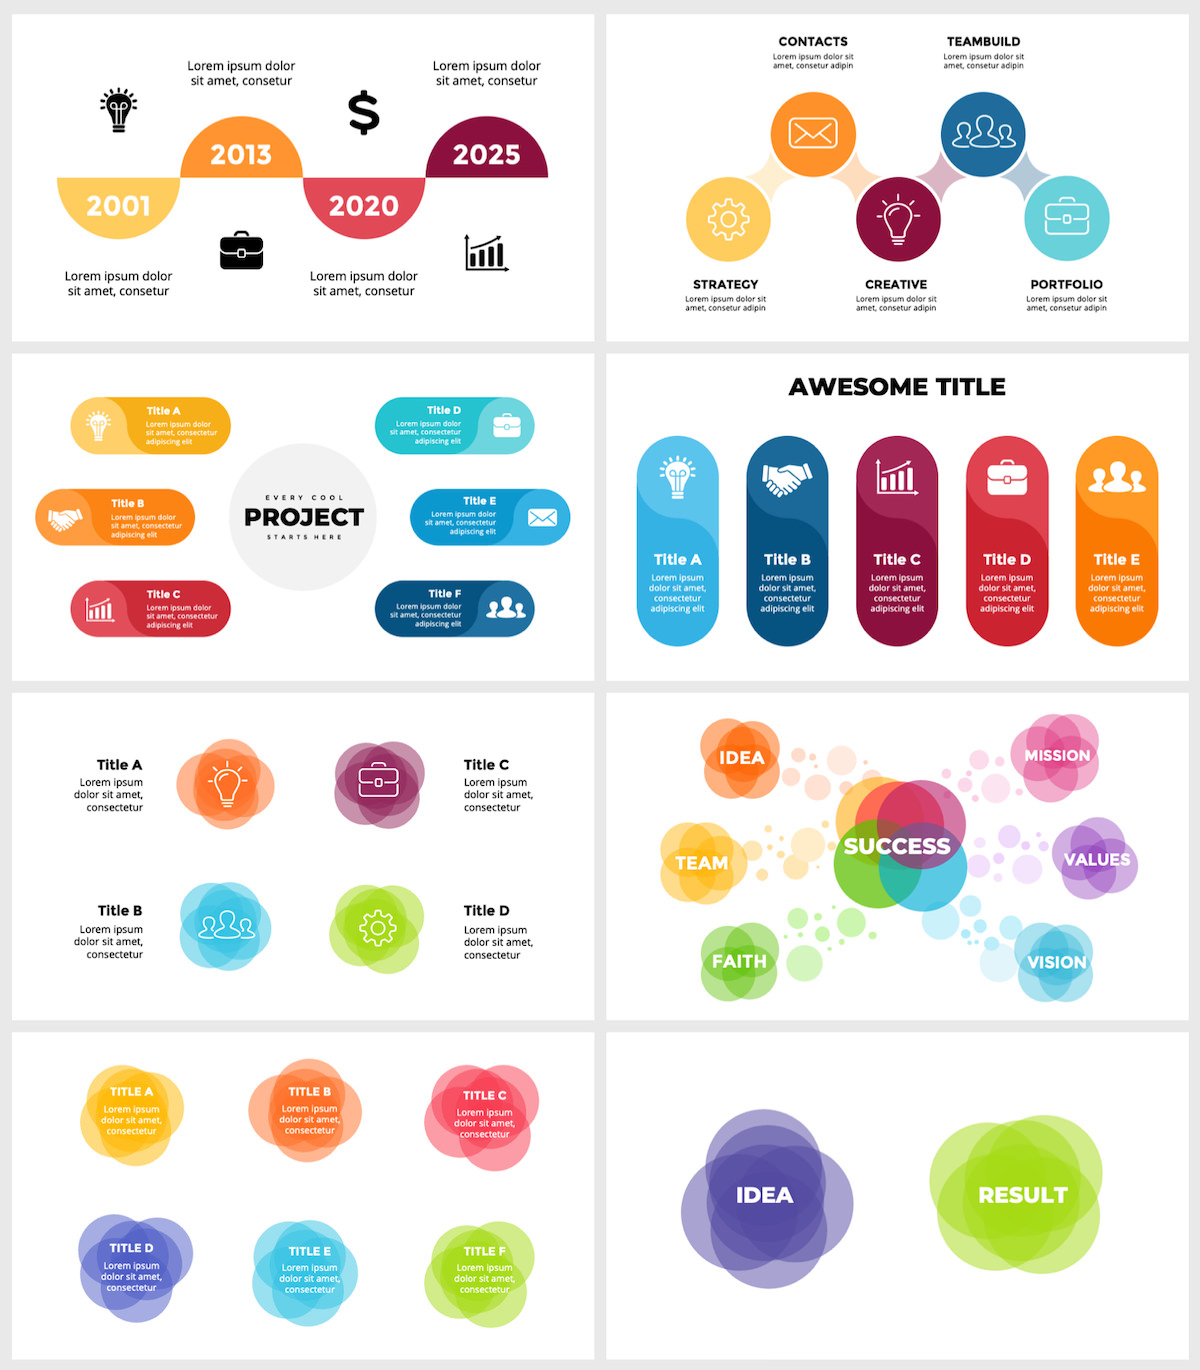 Wowly - 3500 Infographics & Presentation Templates! Updated! PowerPoint Canva Figma Sketch Ai Psd. - 131